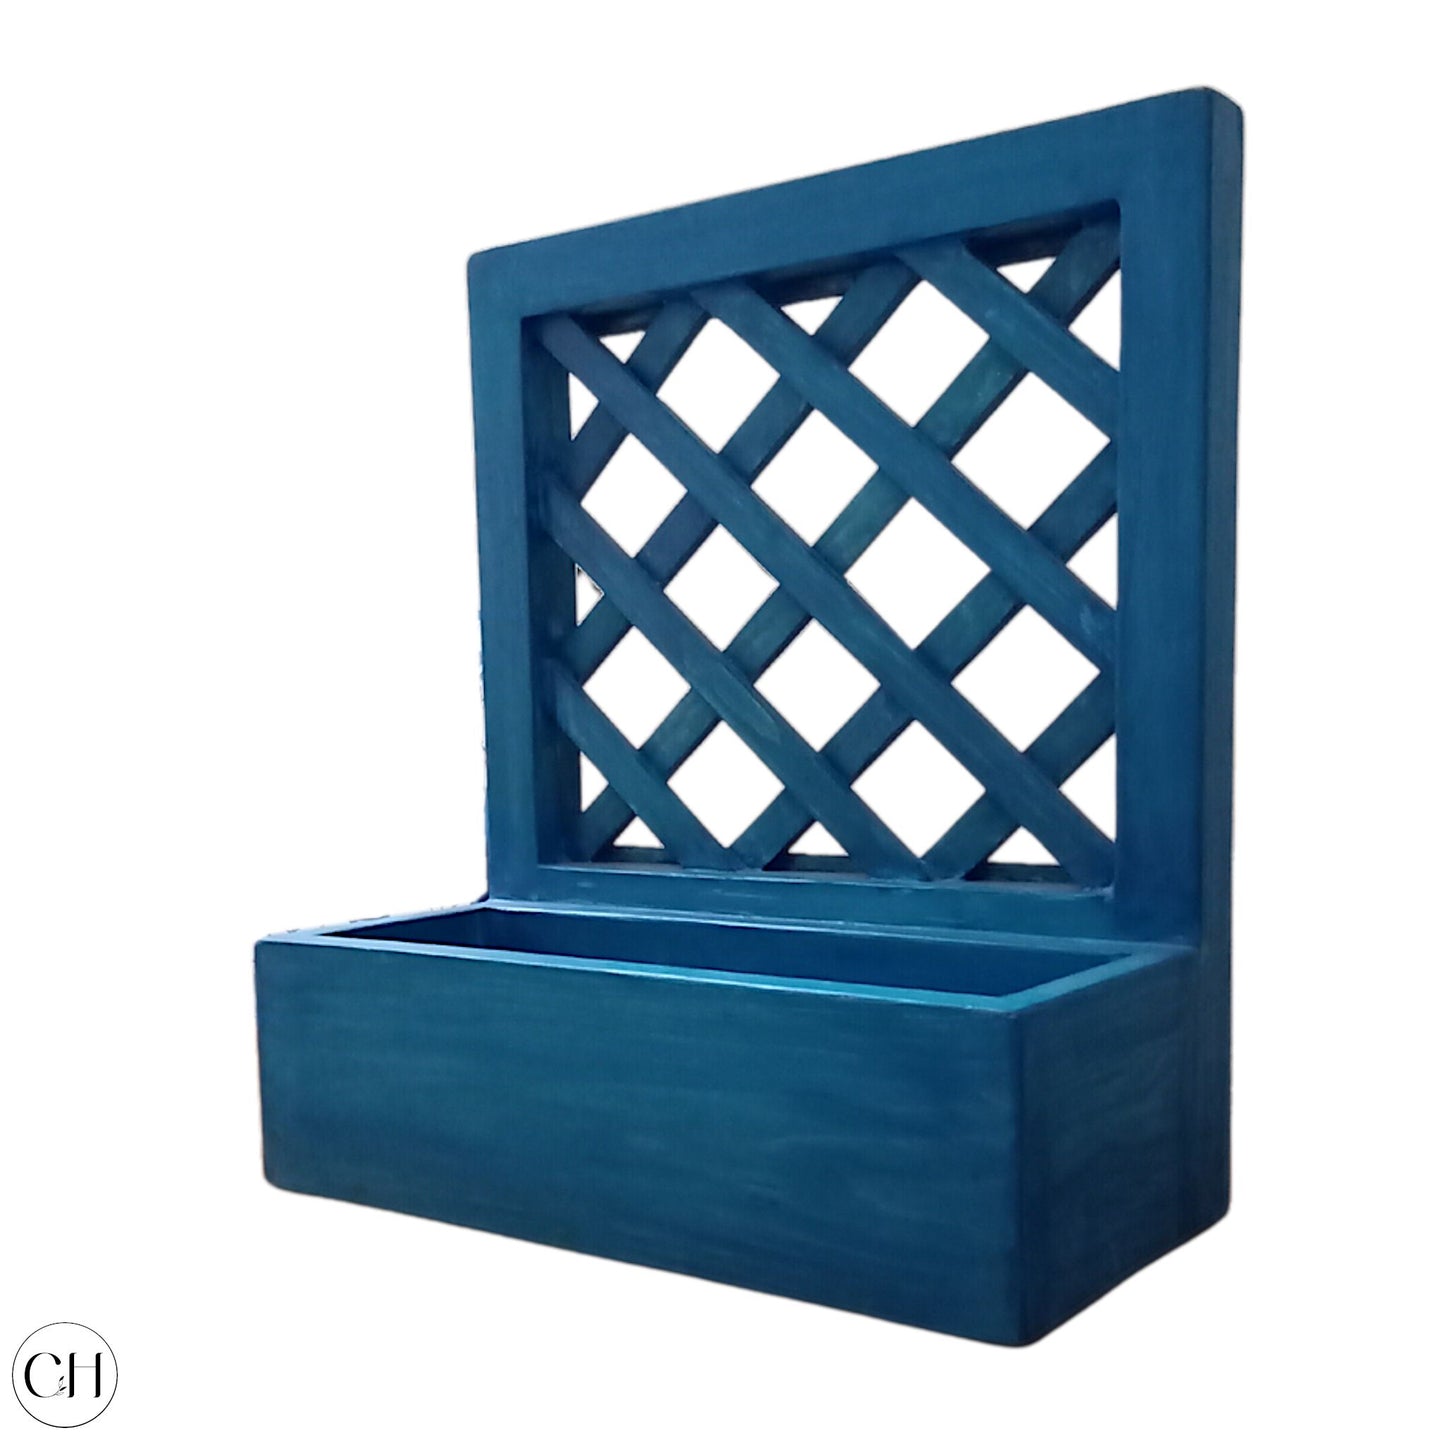 CustHum-Senja-small wooden planter with trellis on the back (teal, ISO view, white background)